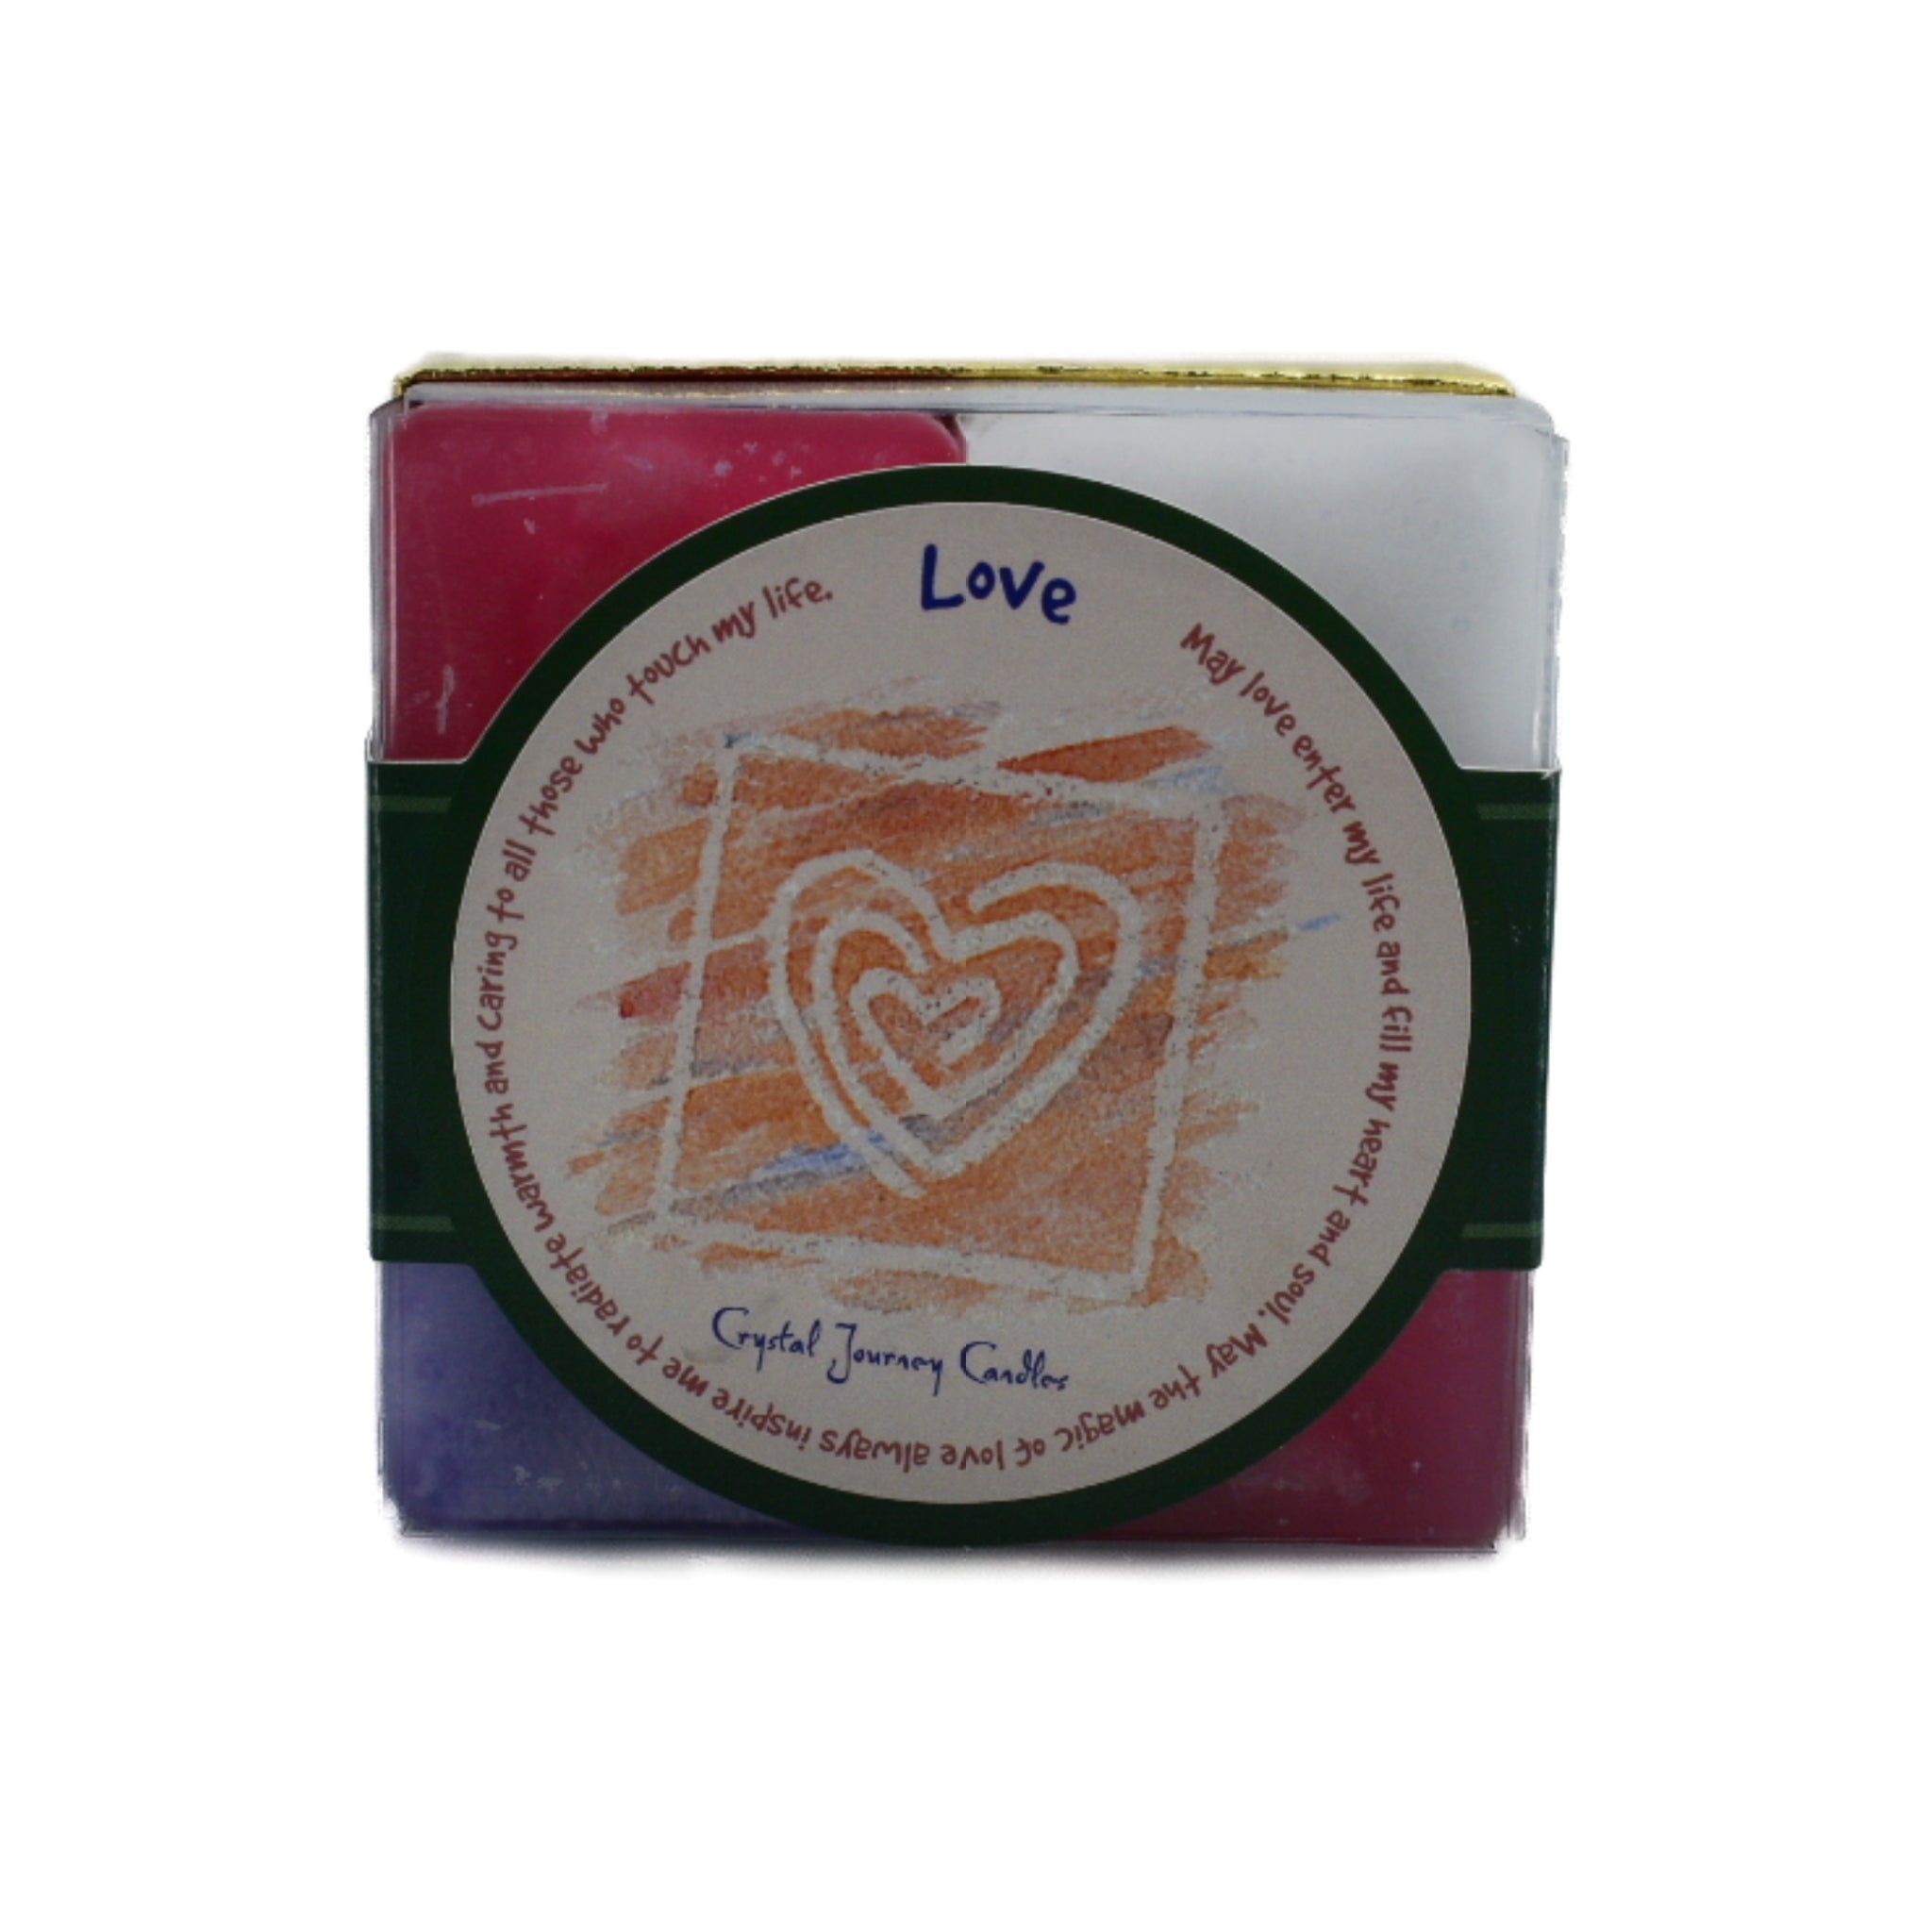 Love Square Pack Candle.  This pack has a violet colored harmony candle, a white spirit candle and two pink love candles.  Light them up to bring the love into your heart and soul.